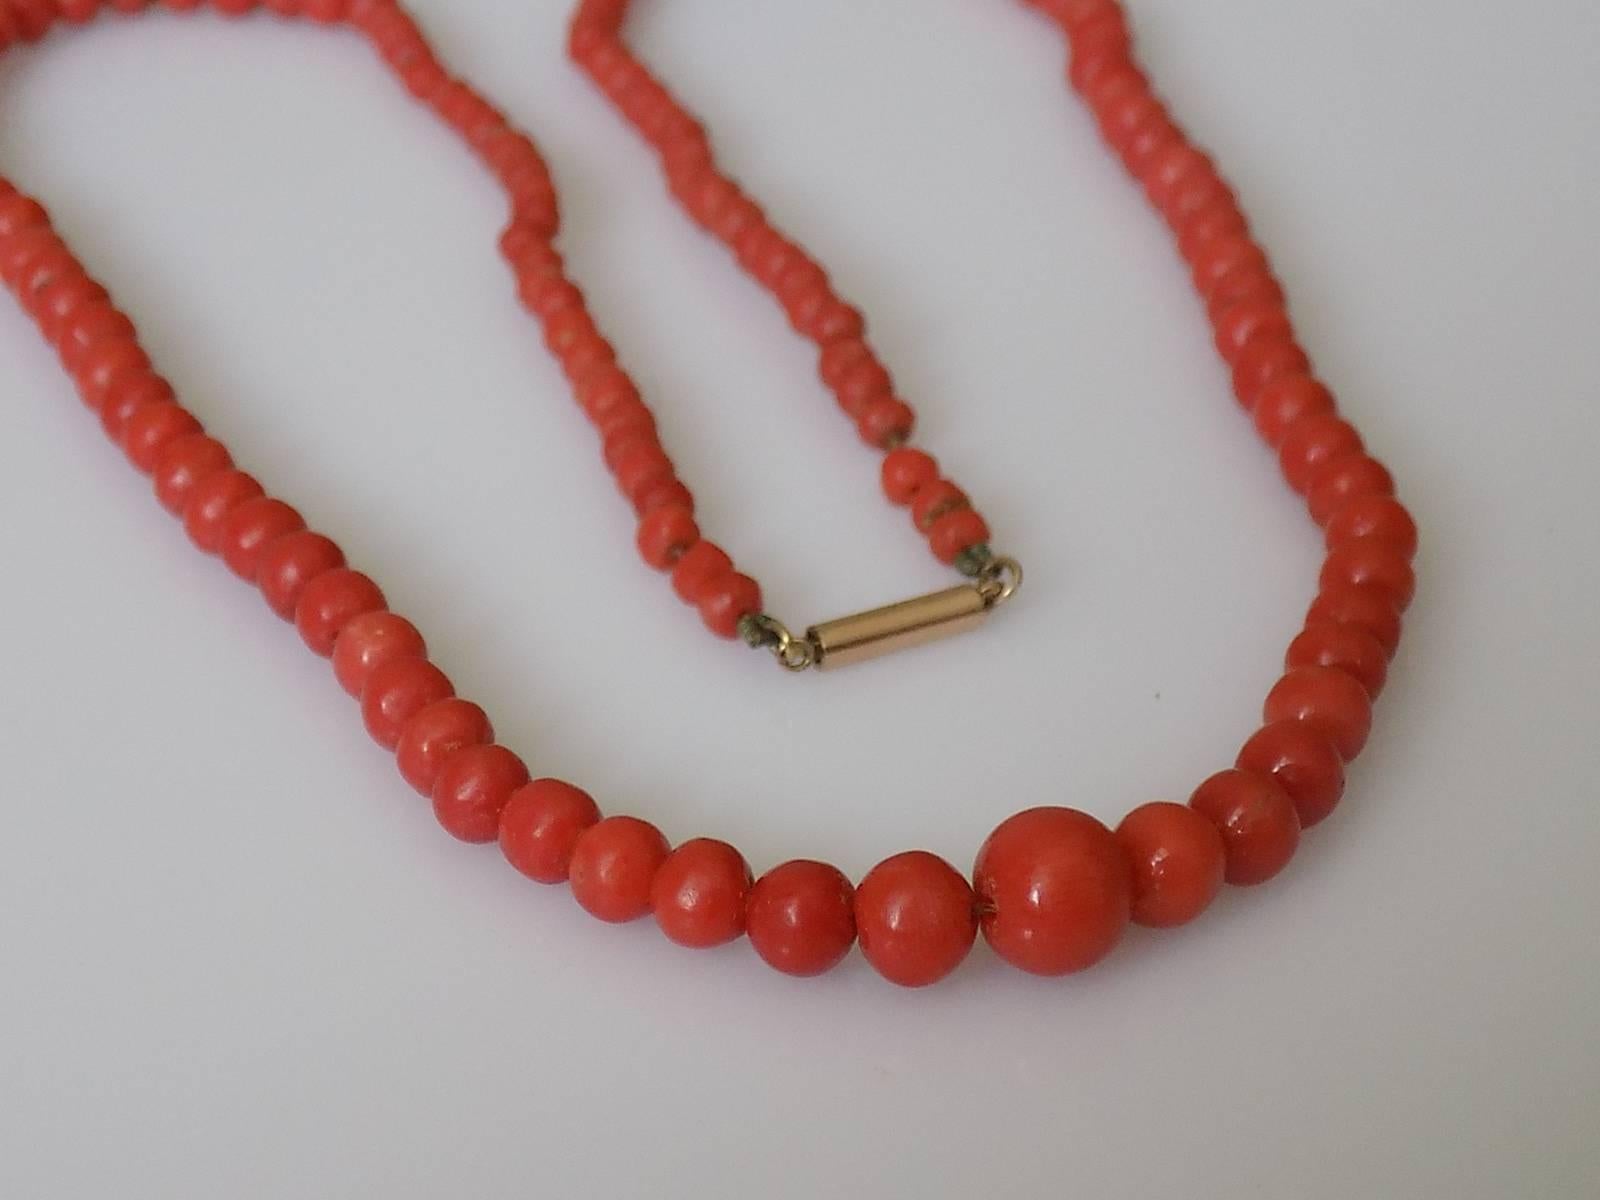 An Antique Victorian c.1880s natural Red Salmon Coral beads necklace on gold "Push In" barrel clasp. English origin.
Length of the necklace including clasp 19". 
The beads graduated from 2mm to 6mm.
Weight 13.1gr.
The necklace in